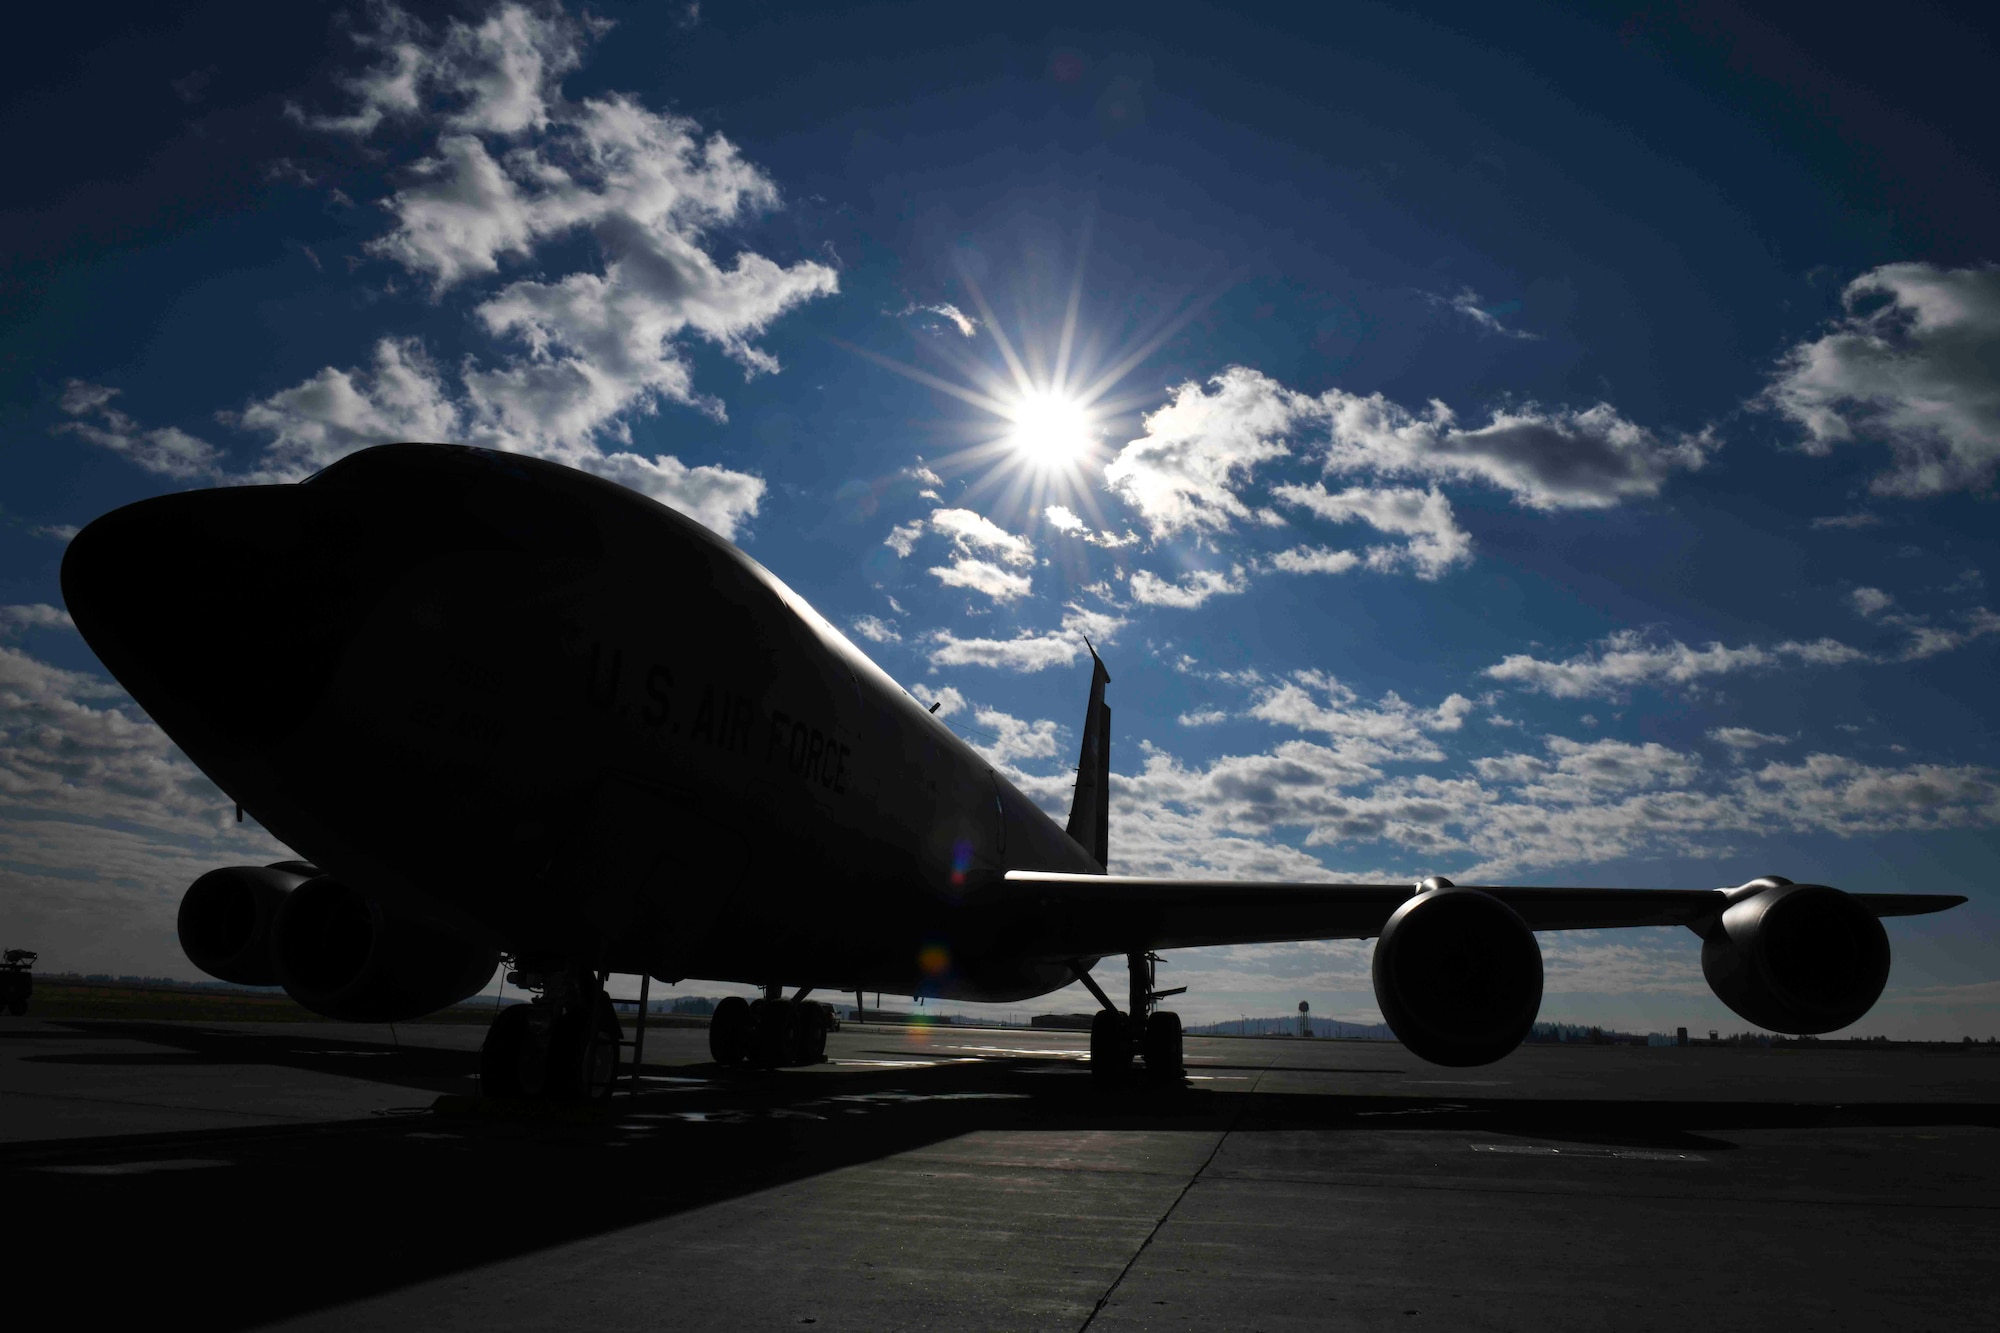 A U.S. Air Force KC-135 Stratotanker from the 92nd Air Refueling Wing sits on the flightline during exercise Global Thunder 21 at Fairchild Air Force Base, Washington, Oct. 22, 2020. This exercise employs global operations in coordination with other combatant commands, services, appropriate U.S. government agencies, and allies to deter, detect and, if necessary, defeat strategic attacks against the United States and its allies. (U.S. Air Force photo by Airman 1st Class Kiaundra Miller)